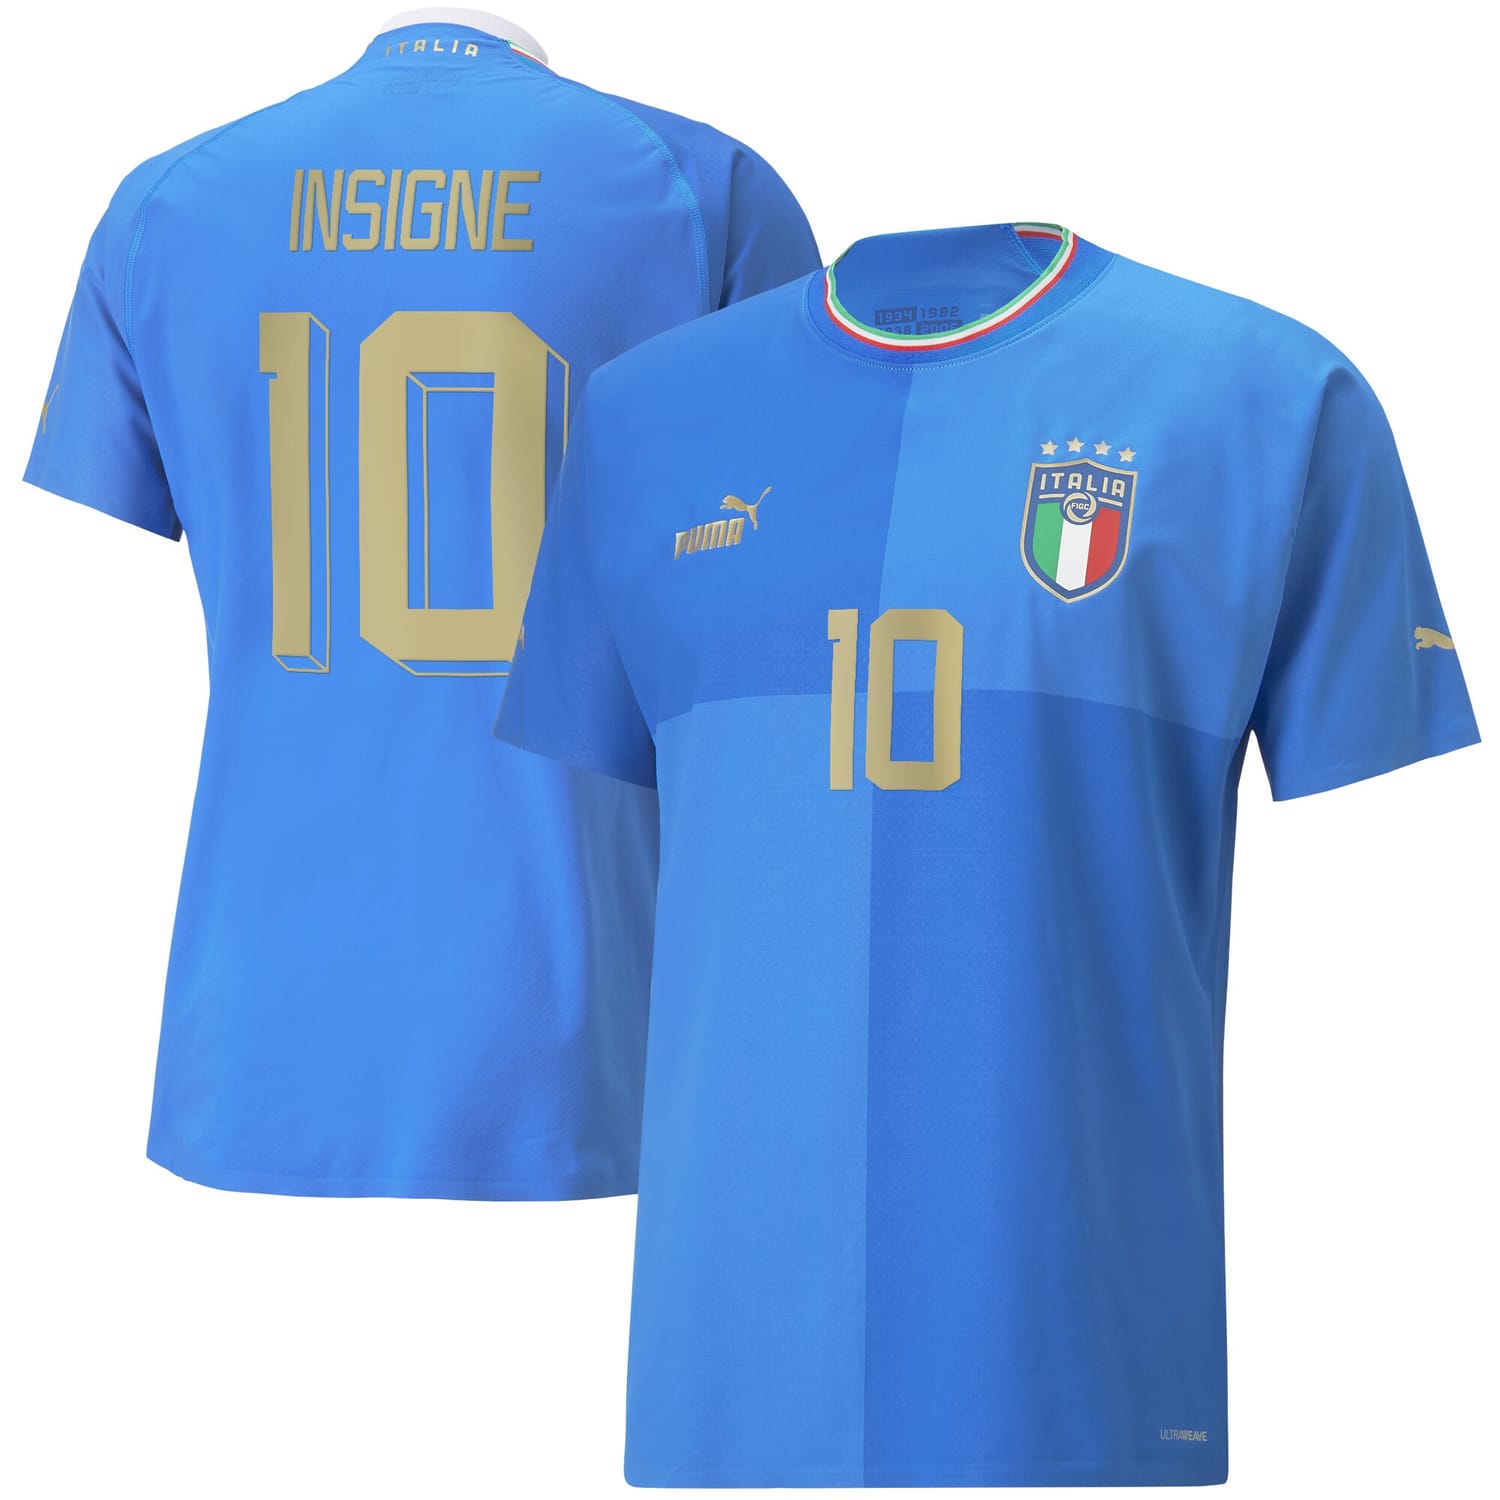 Italy National Team Home Authentic Jersey Shirt Blue 2022-23 player Lorenzo Insigne printing for Men